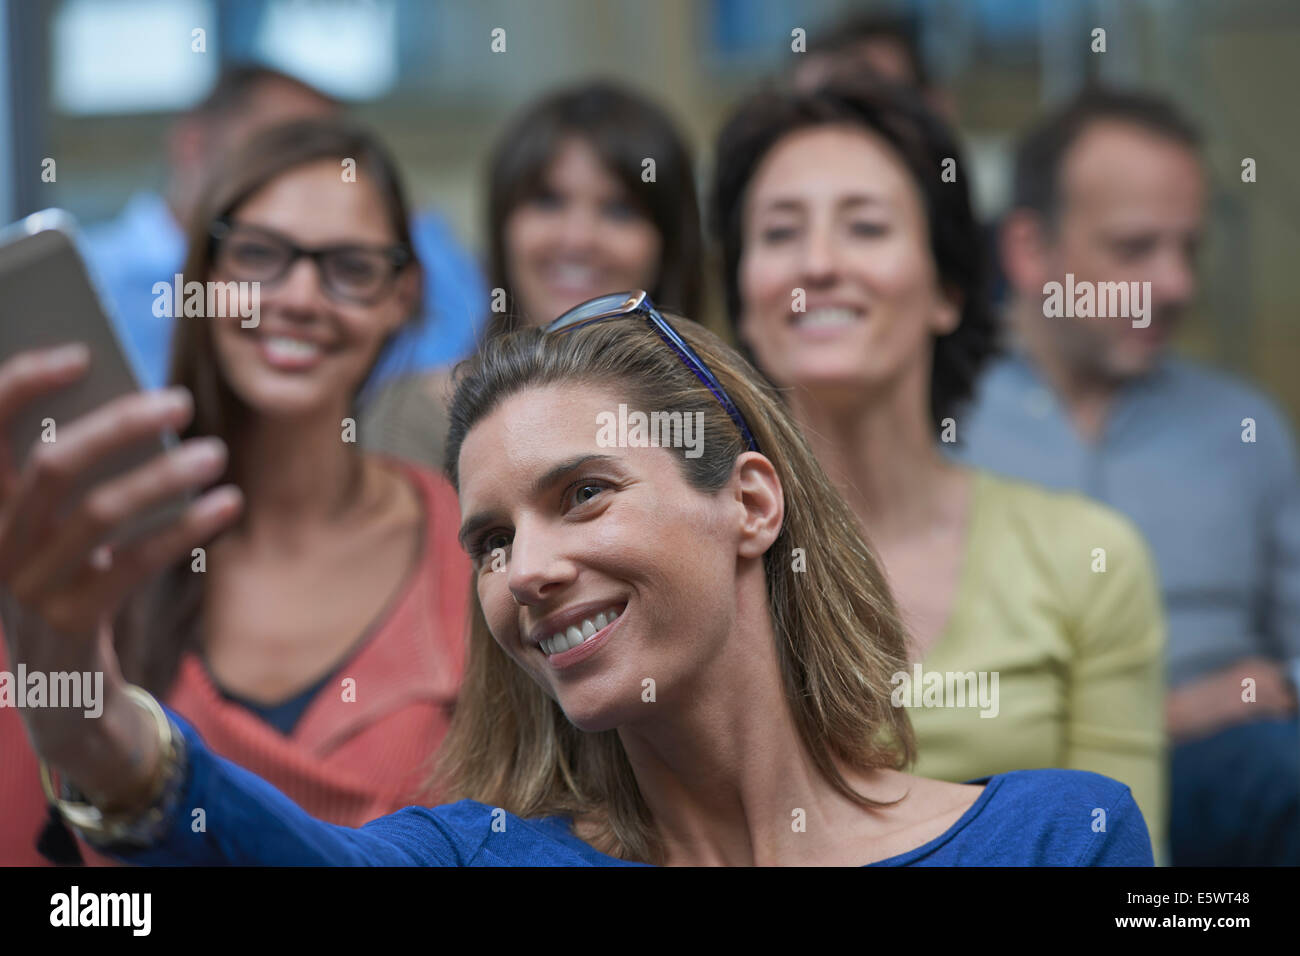 Group of people taking self portrait photograph Stock Photo